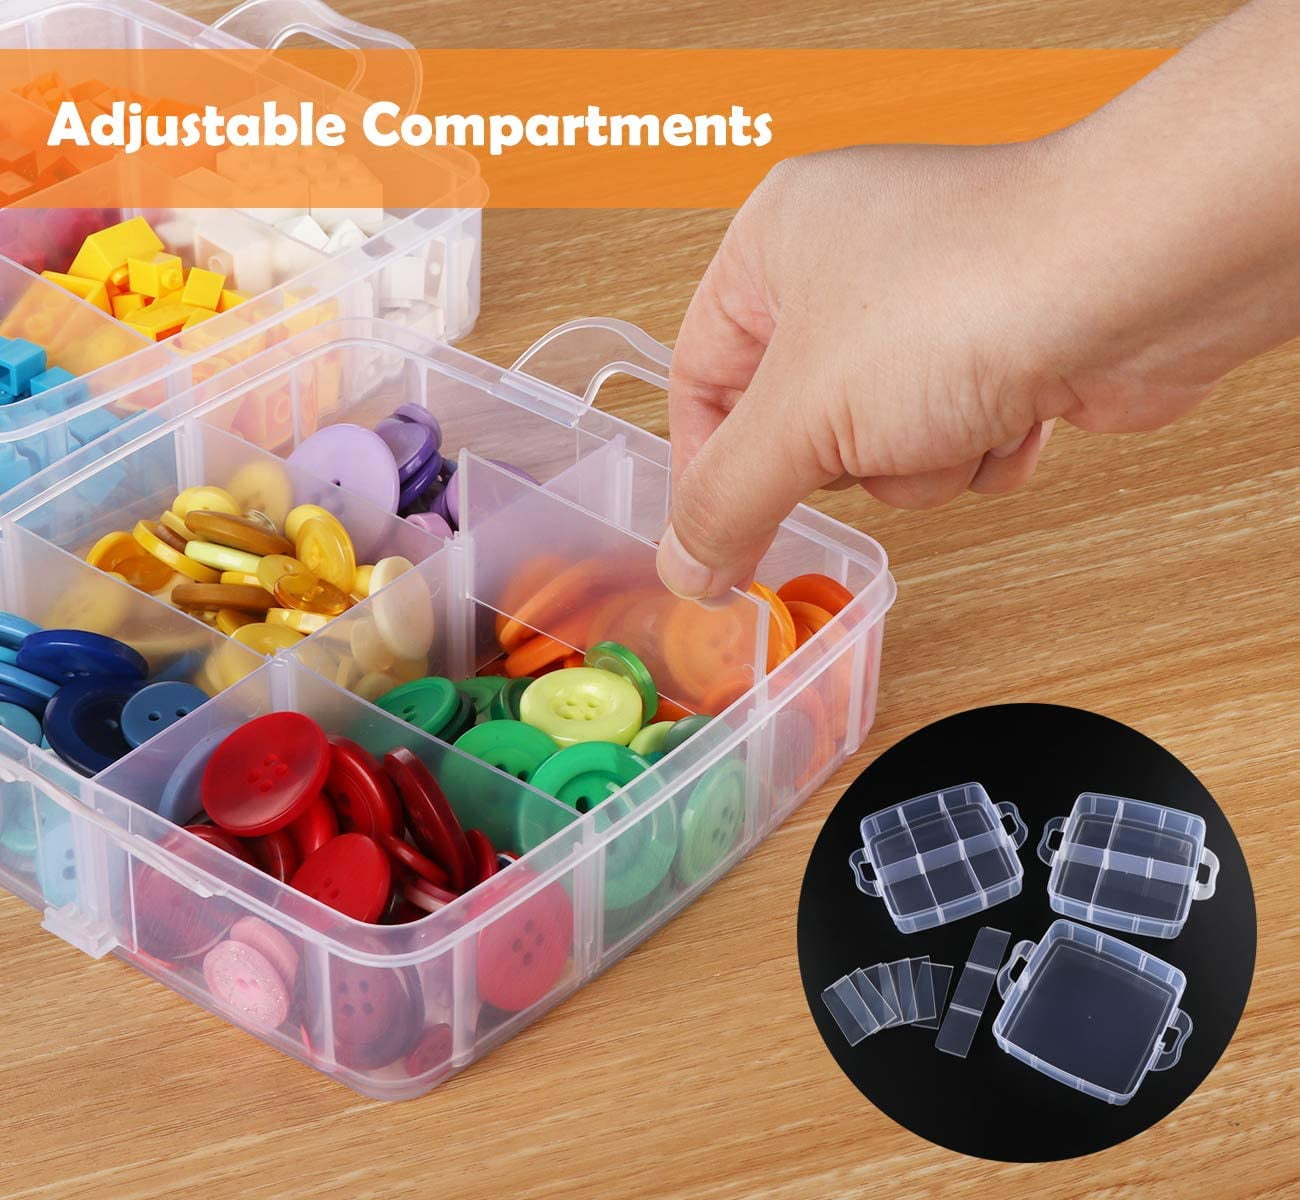 3-Tier Stackable Storage Containers with Dividers - 18 Adjustable  Compartments for Craft Organizers - Clear Storage box,Bead Organizers for  Jewelry, Beads, Kids Toys, and Sewing Supplies 